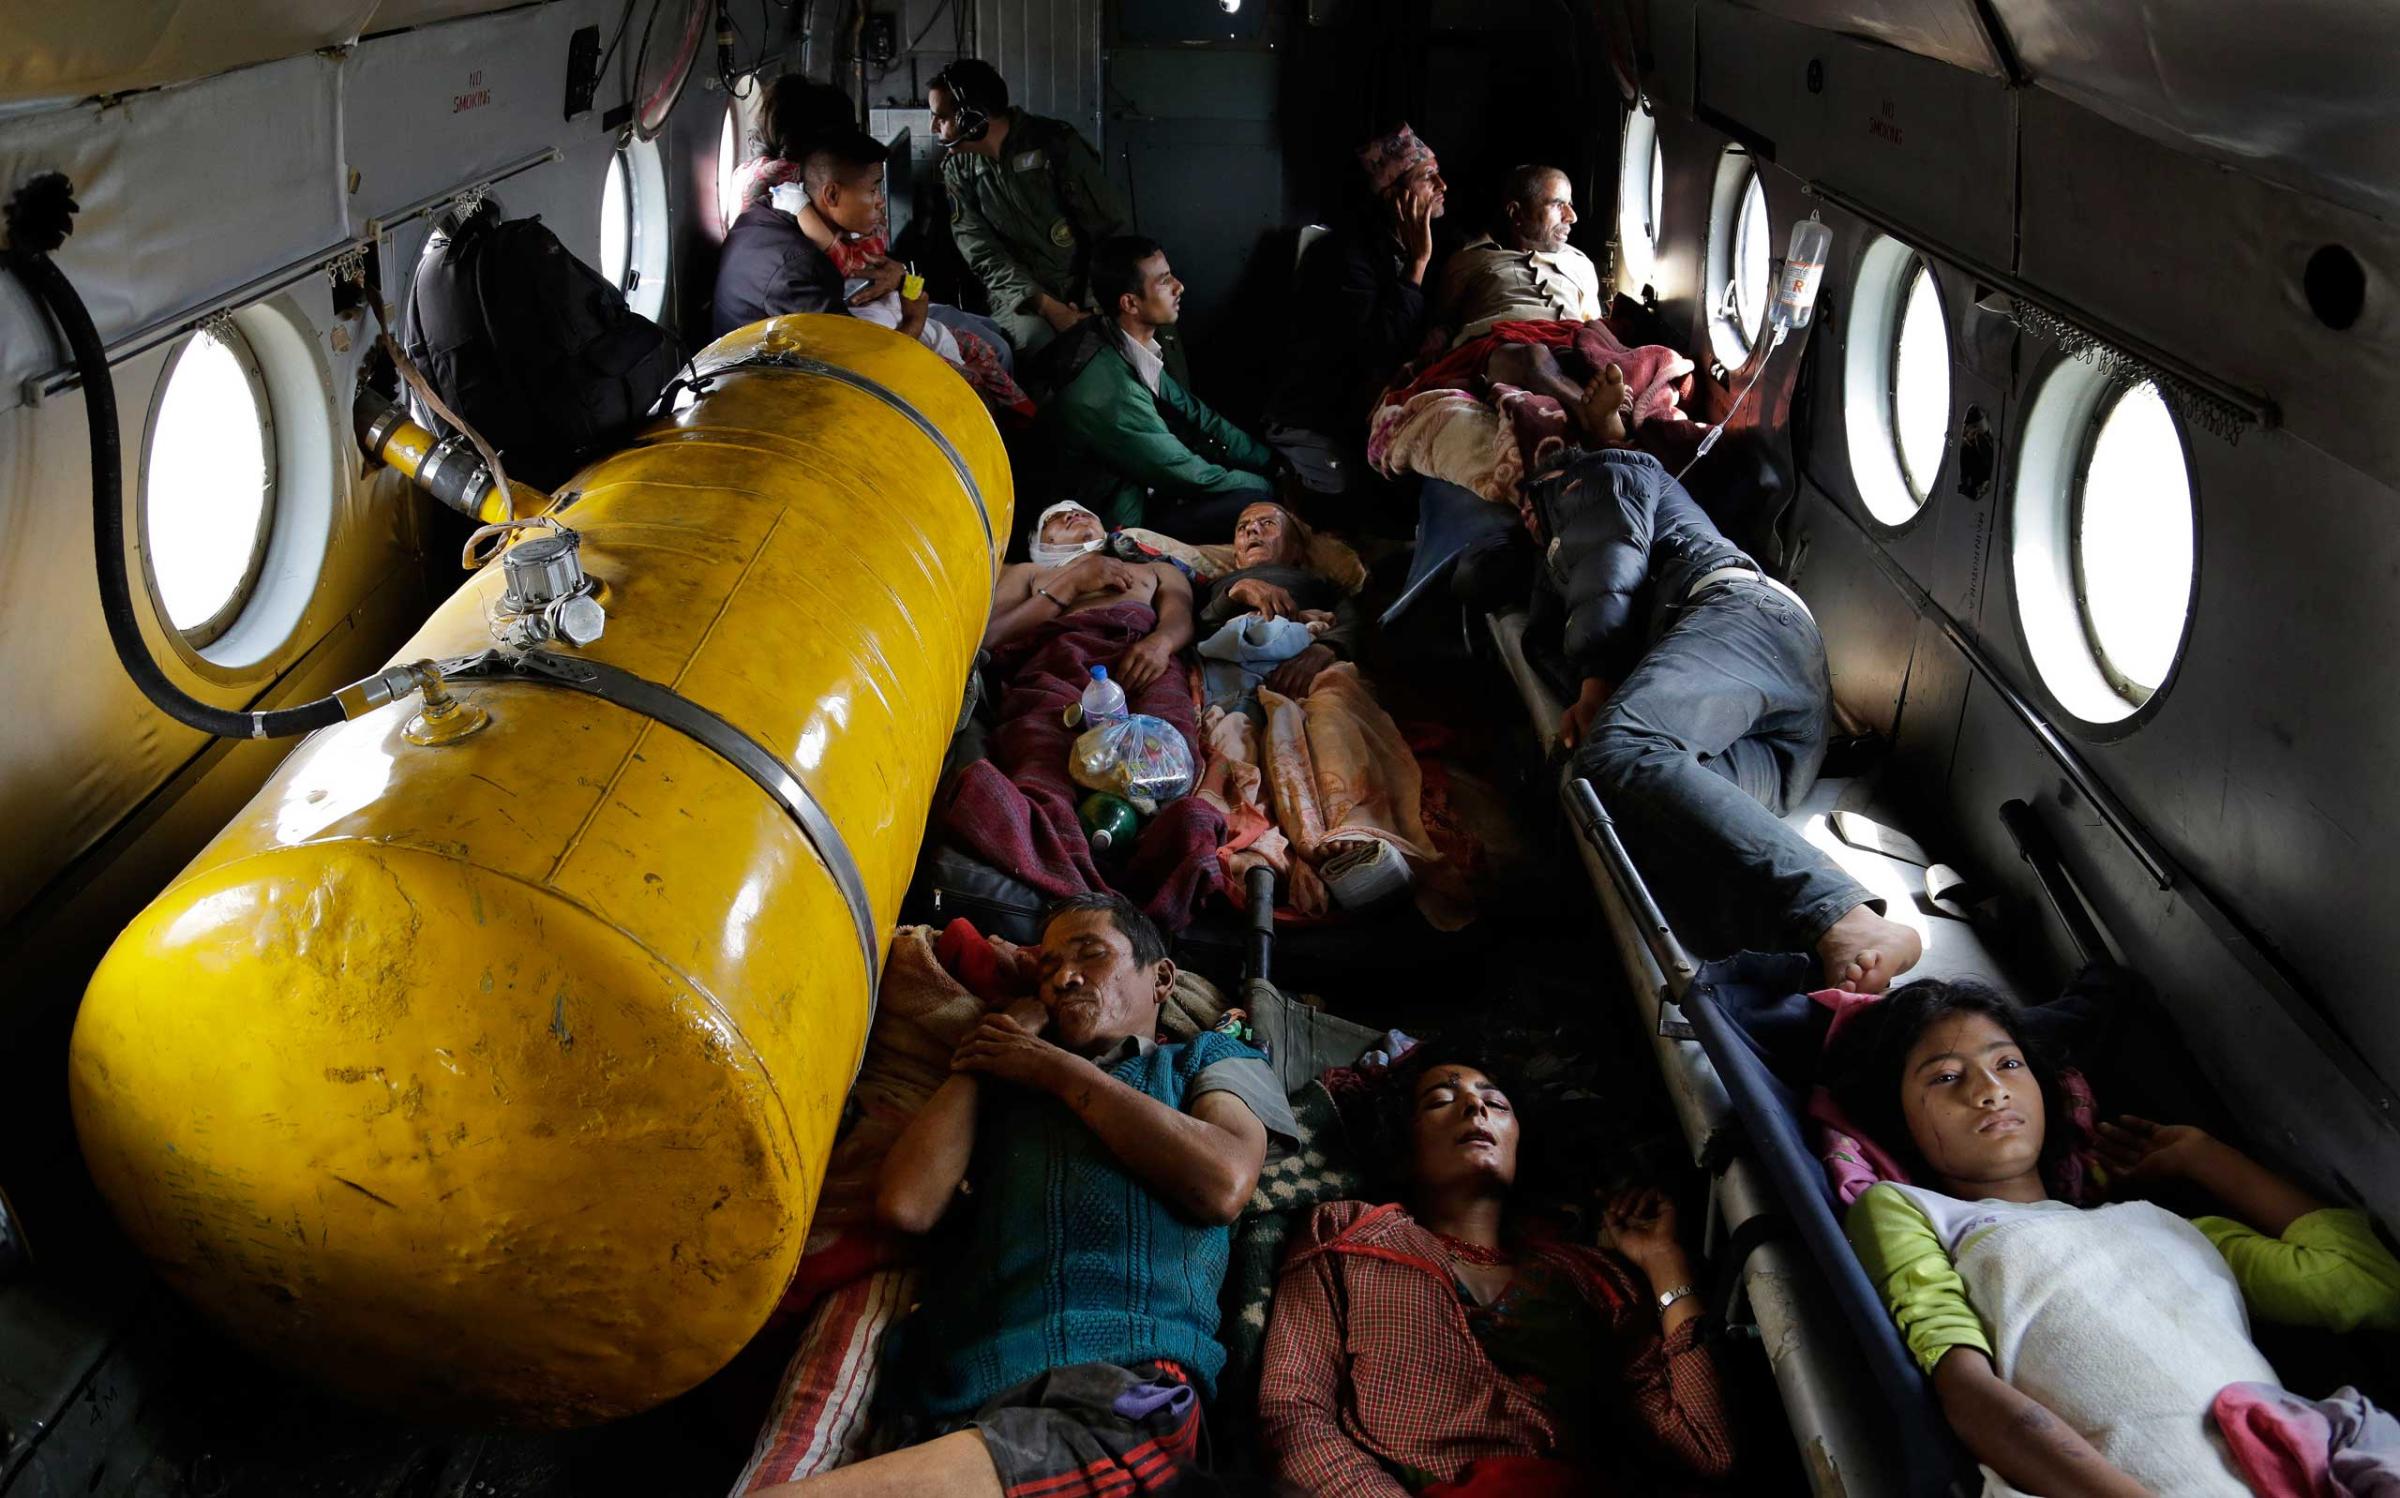 Nepalese victims of Saturday's earthquake lie inside an Indian air force helicopter as they are evacuated from Trishuli Bazar to Kathmandu airport in Nepal on April 27, 2015.